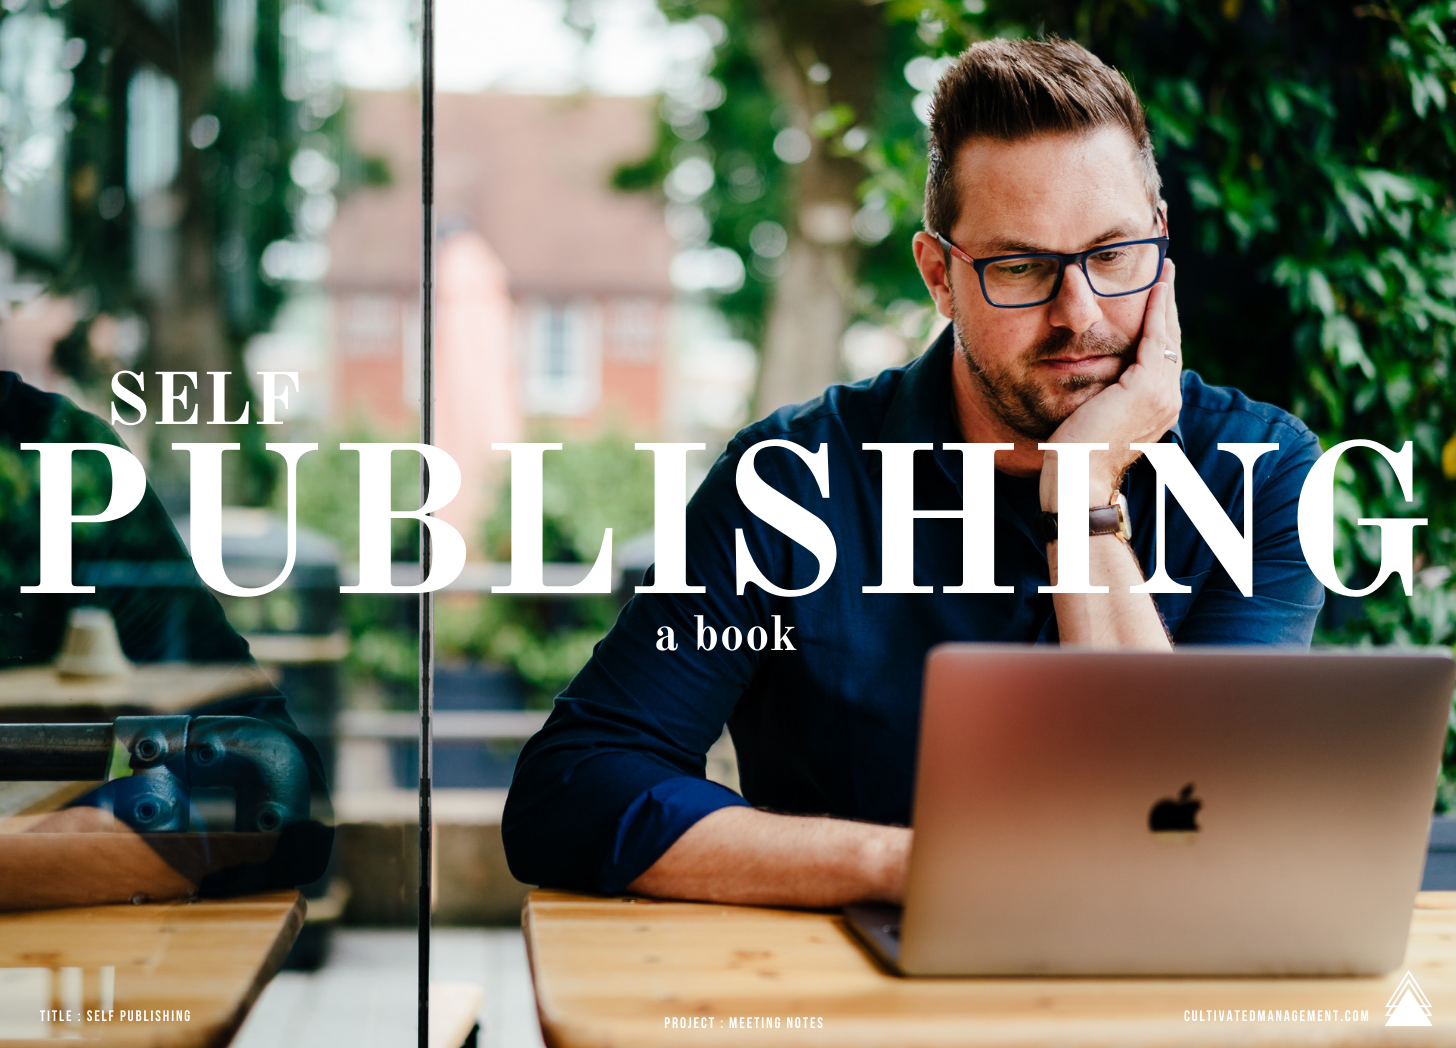 Self publishing a book - 9 lessons learned